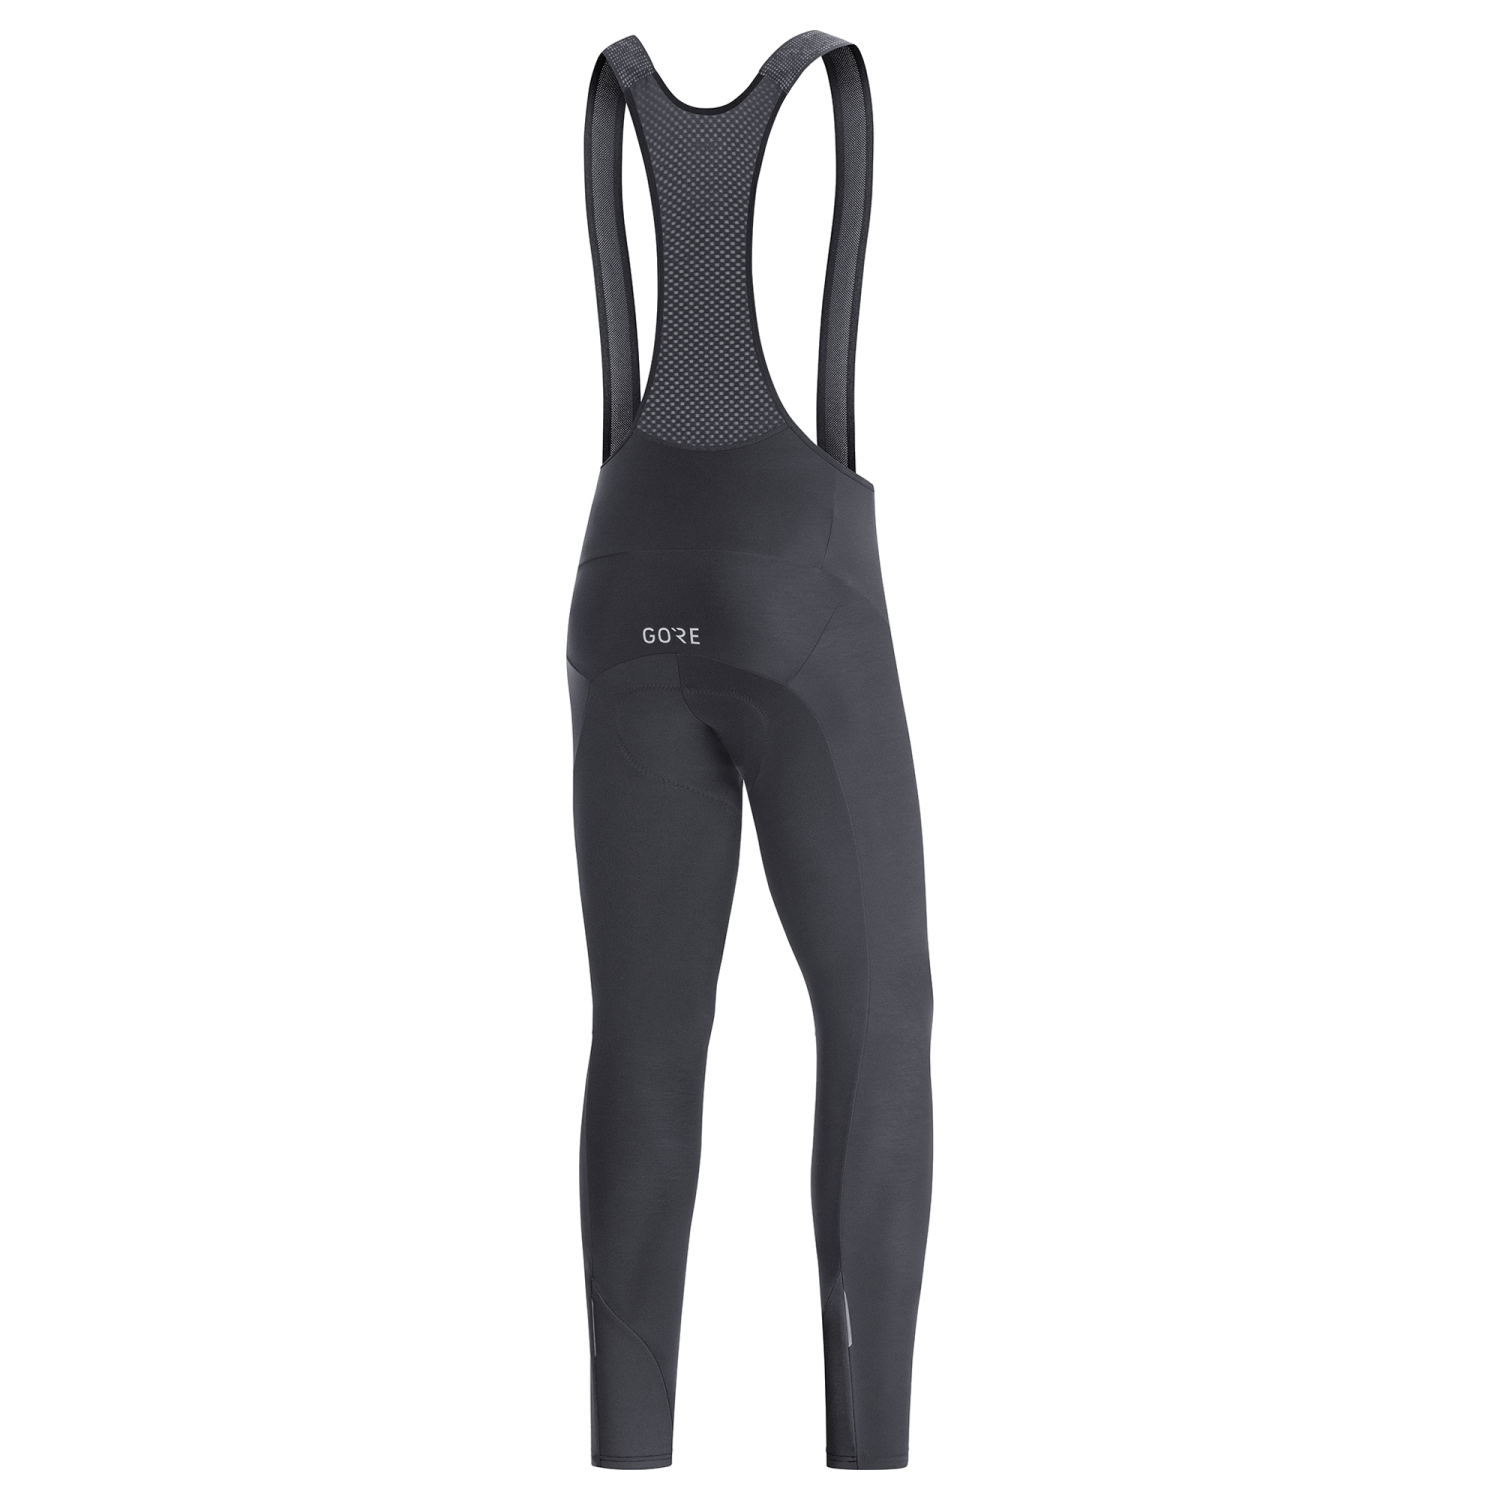 C3 GORE WEAR Mens Thermo Cycling Tights with Seat Pad 